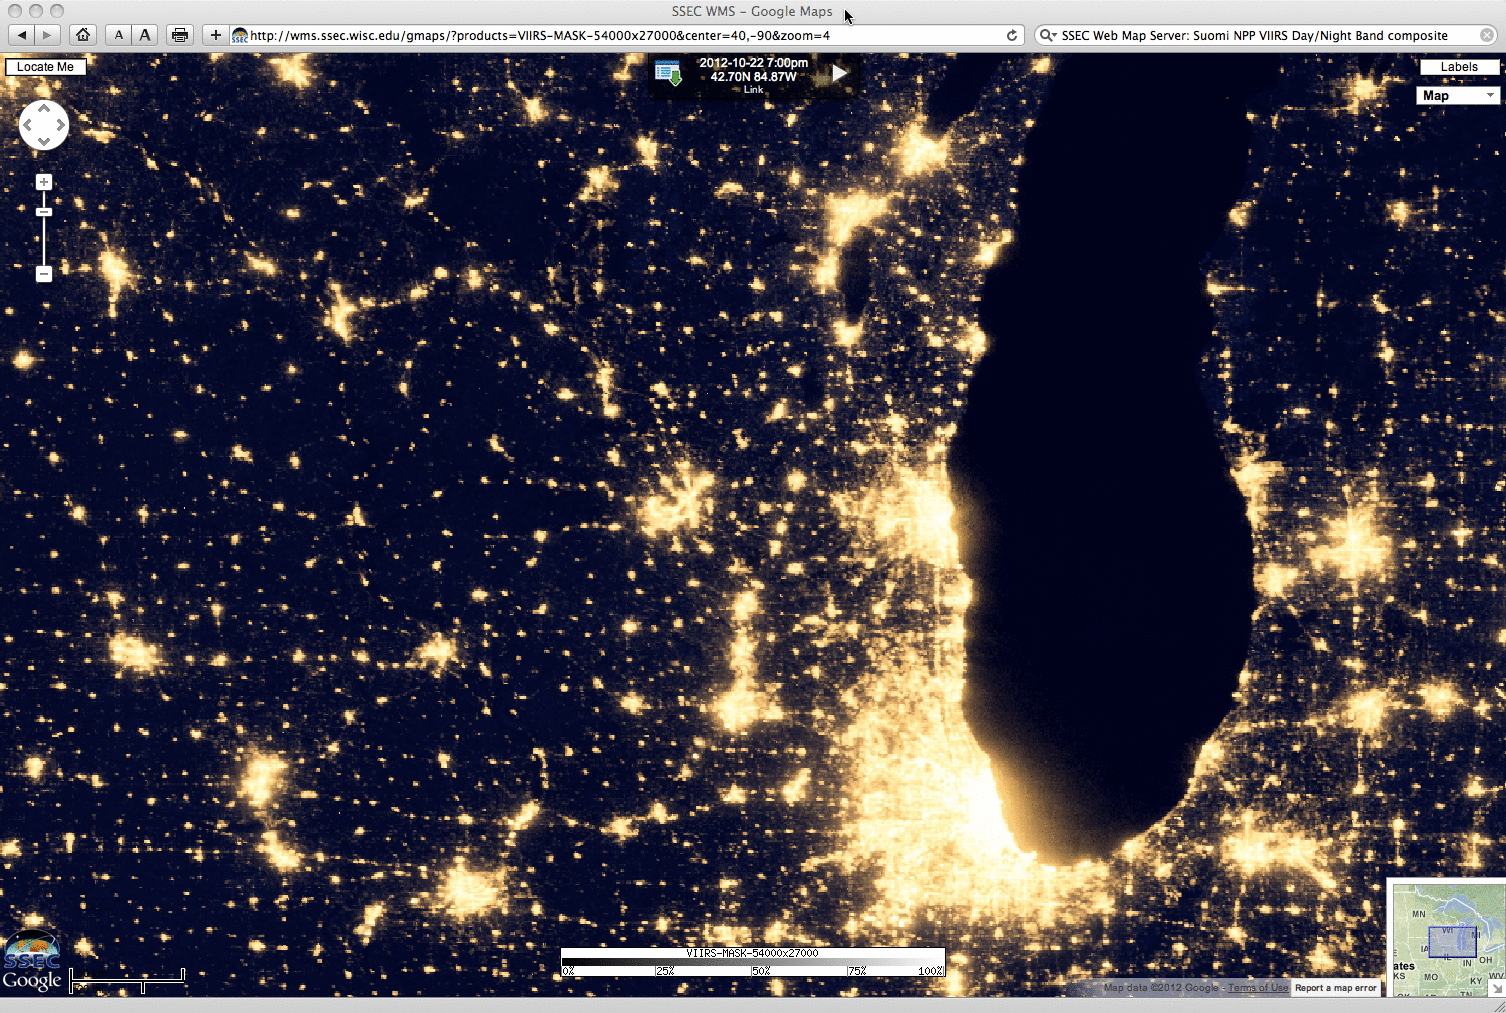 Suomi NPP VIIRS 0.7 Âµm Day/Night Band composite image (centered on Madison, WI)